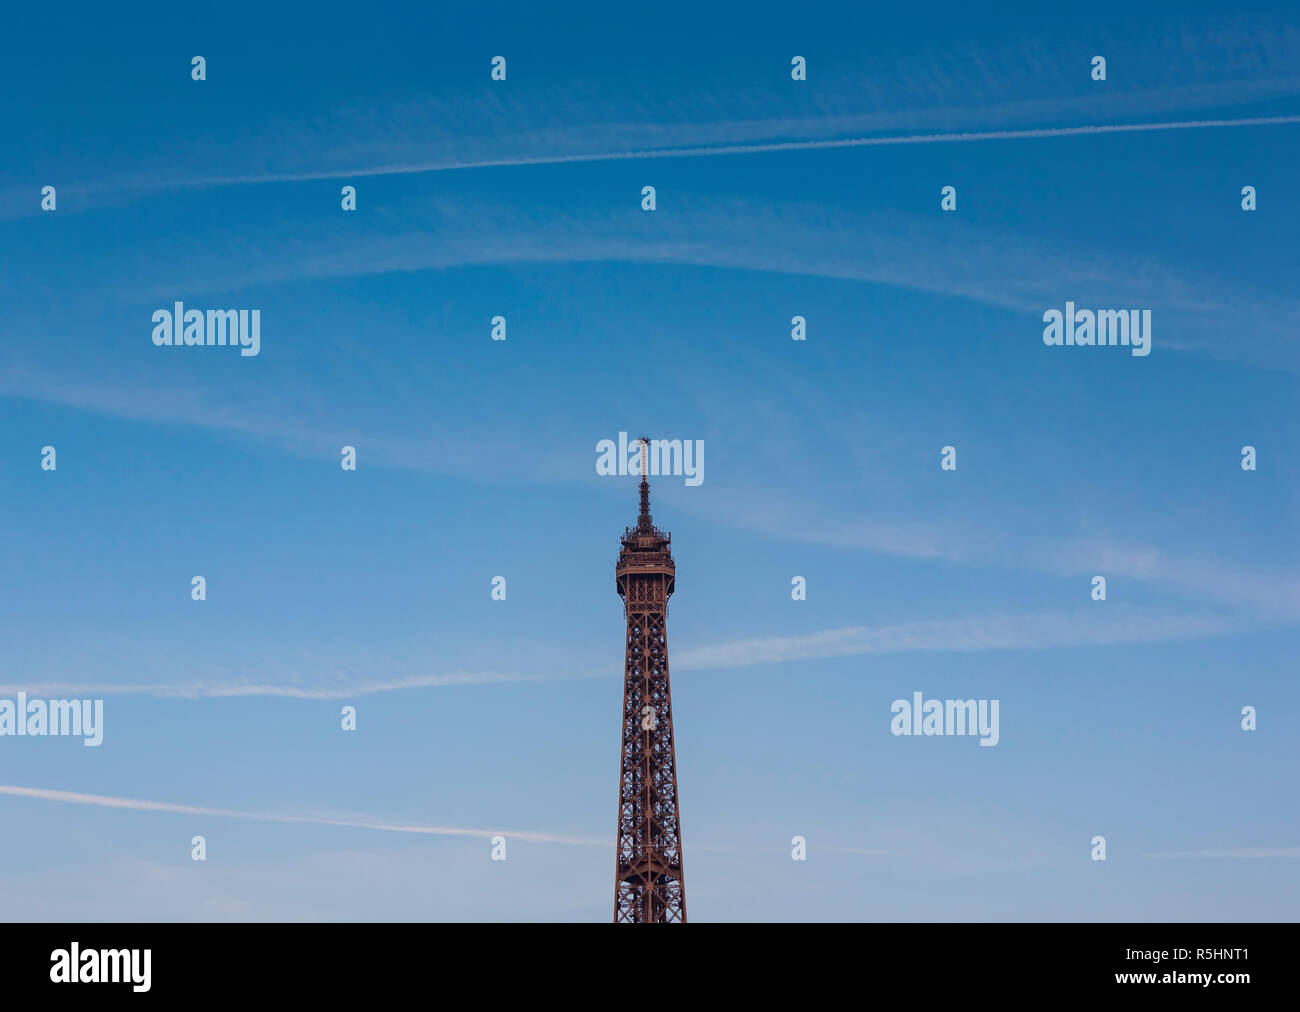 Eiffel Tower, a wrought-iron lattice tower on the Champ de Mars in Paris, France, photographed from the Trocodero of the  second level and above at th Stock Photo